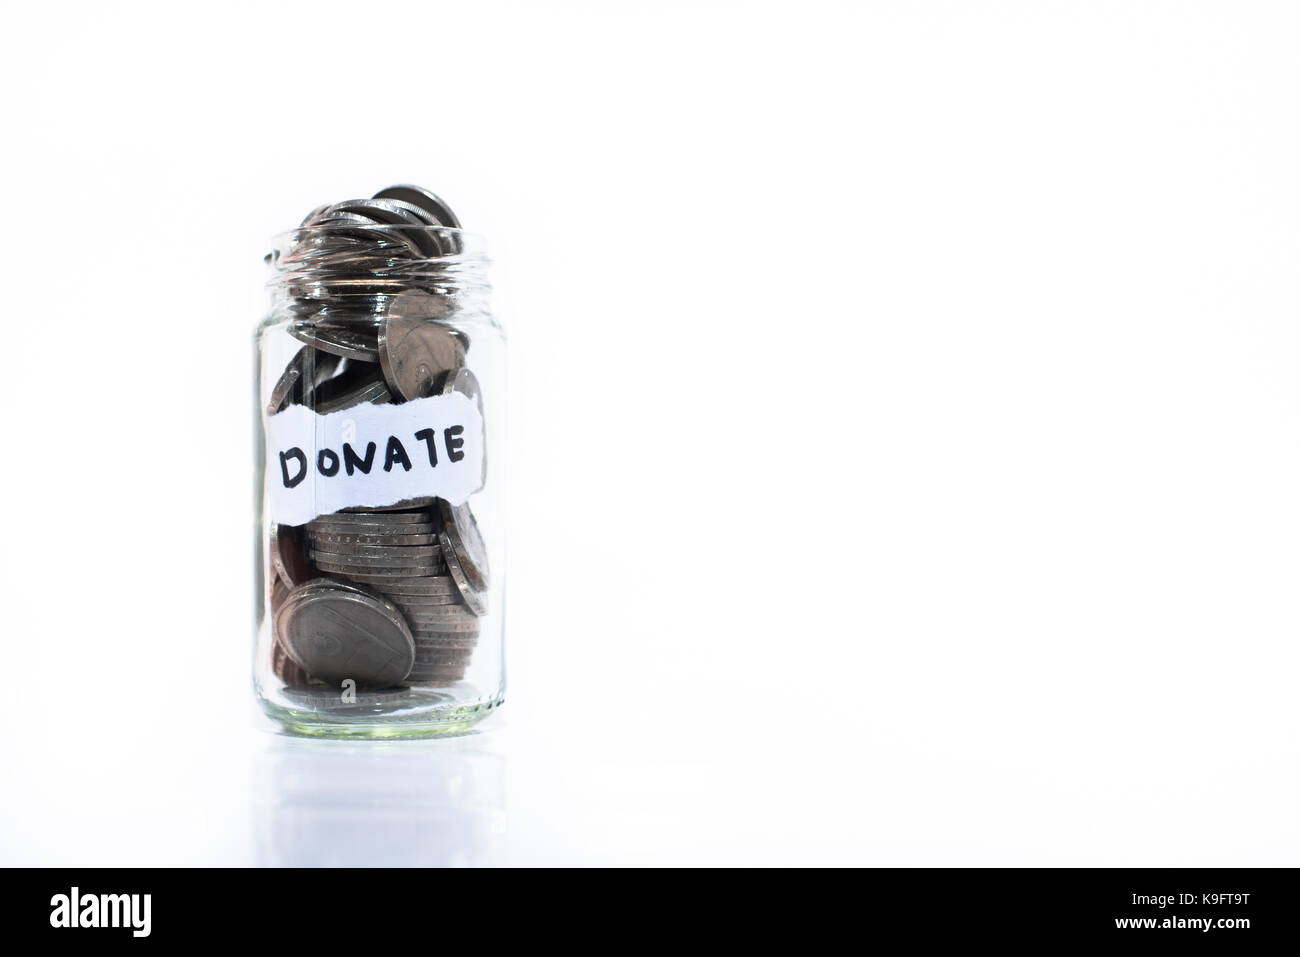 Coins in glass jar with a note written ' DONATE '. Isolated on a white background. Saving money to help others. Donation concept and Saving concept. M Stock Photo